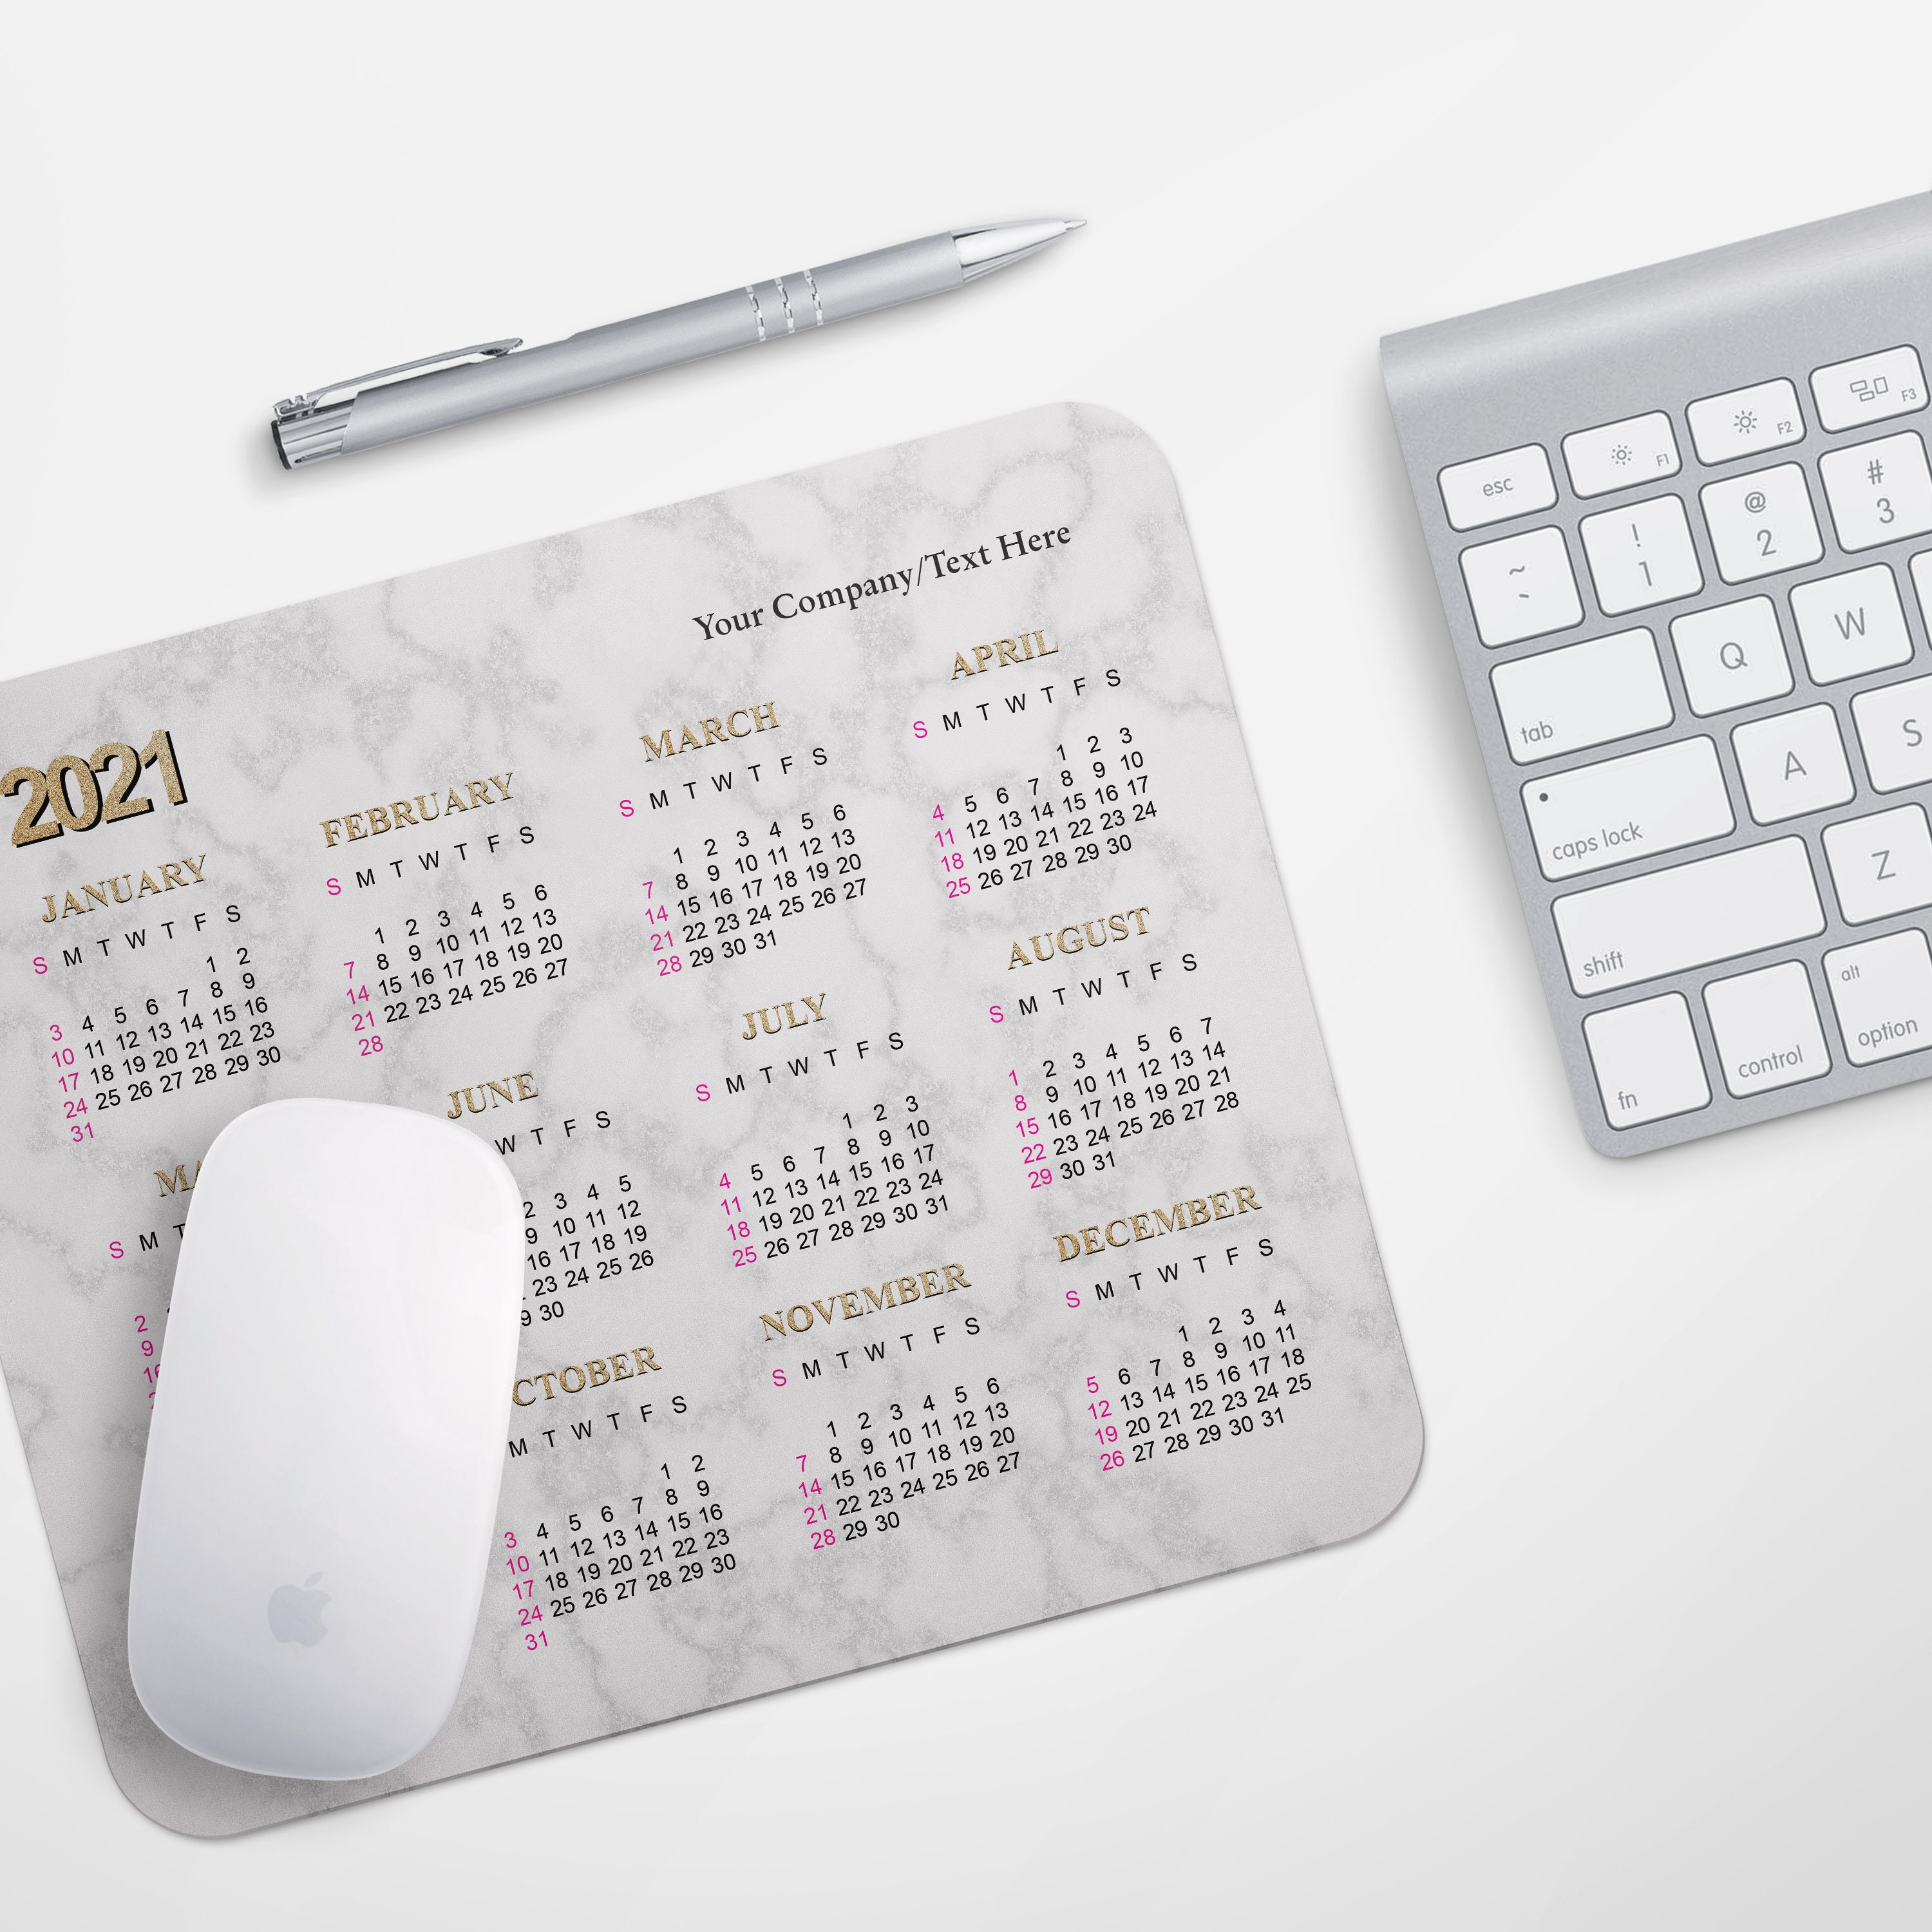 MOUSE PAD CALENDAR White Marble Mouse Pad Desk Mouse Pad Etsy